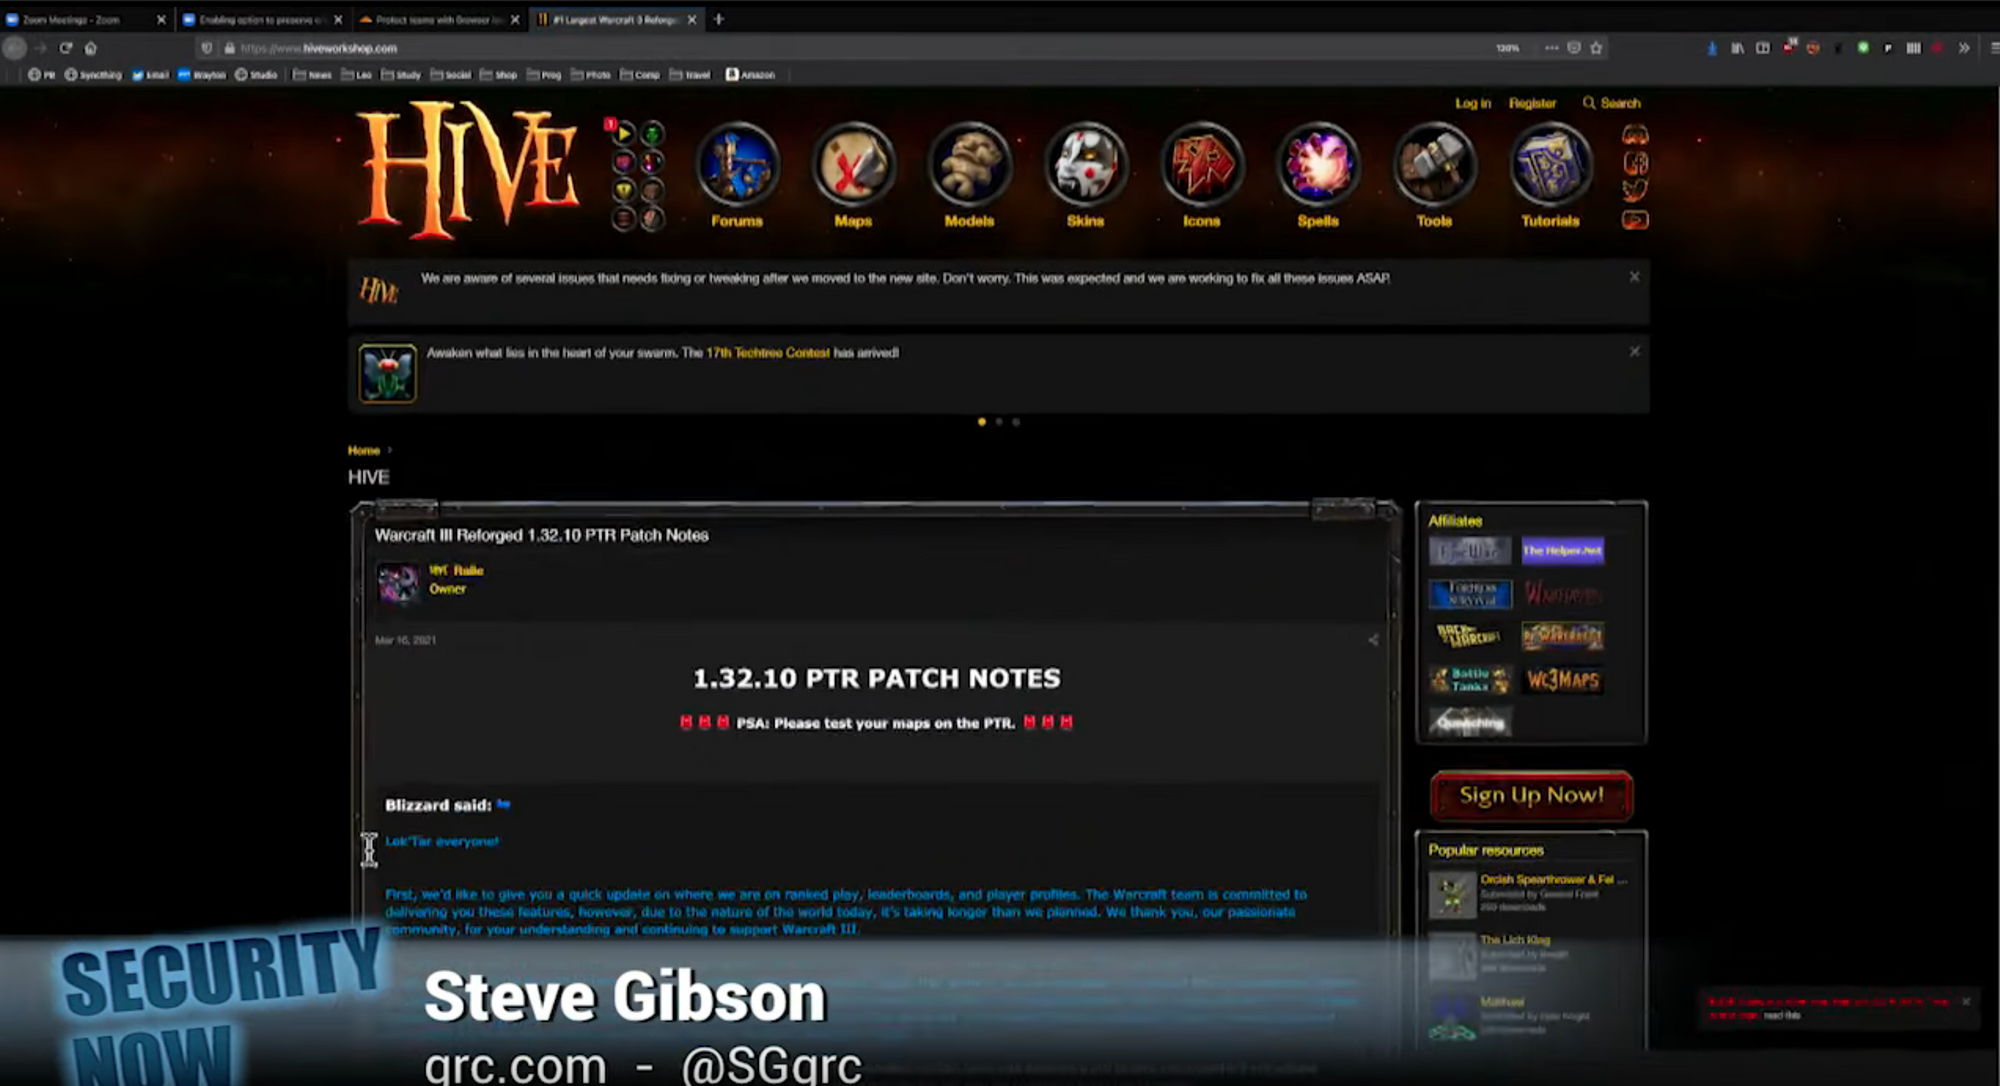 Steve Gibson mentioned Hive 3